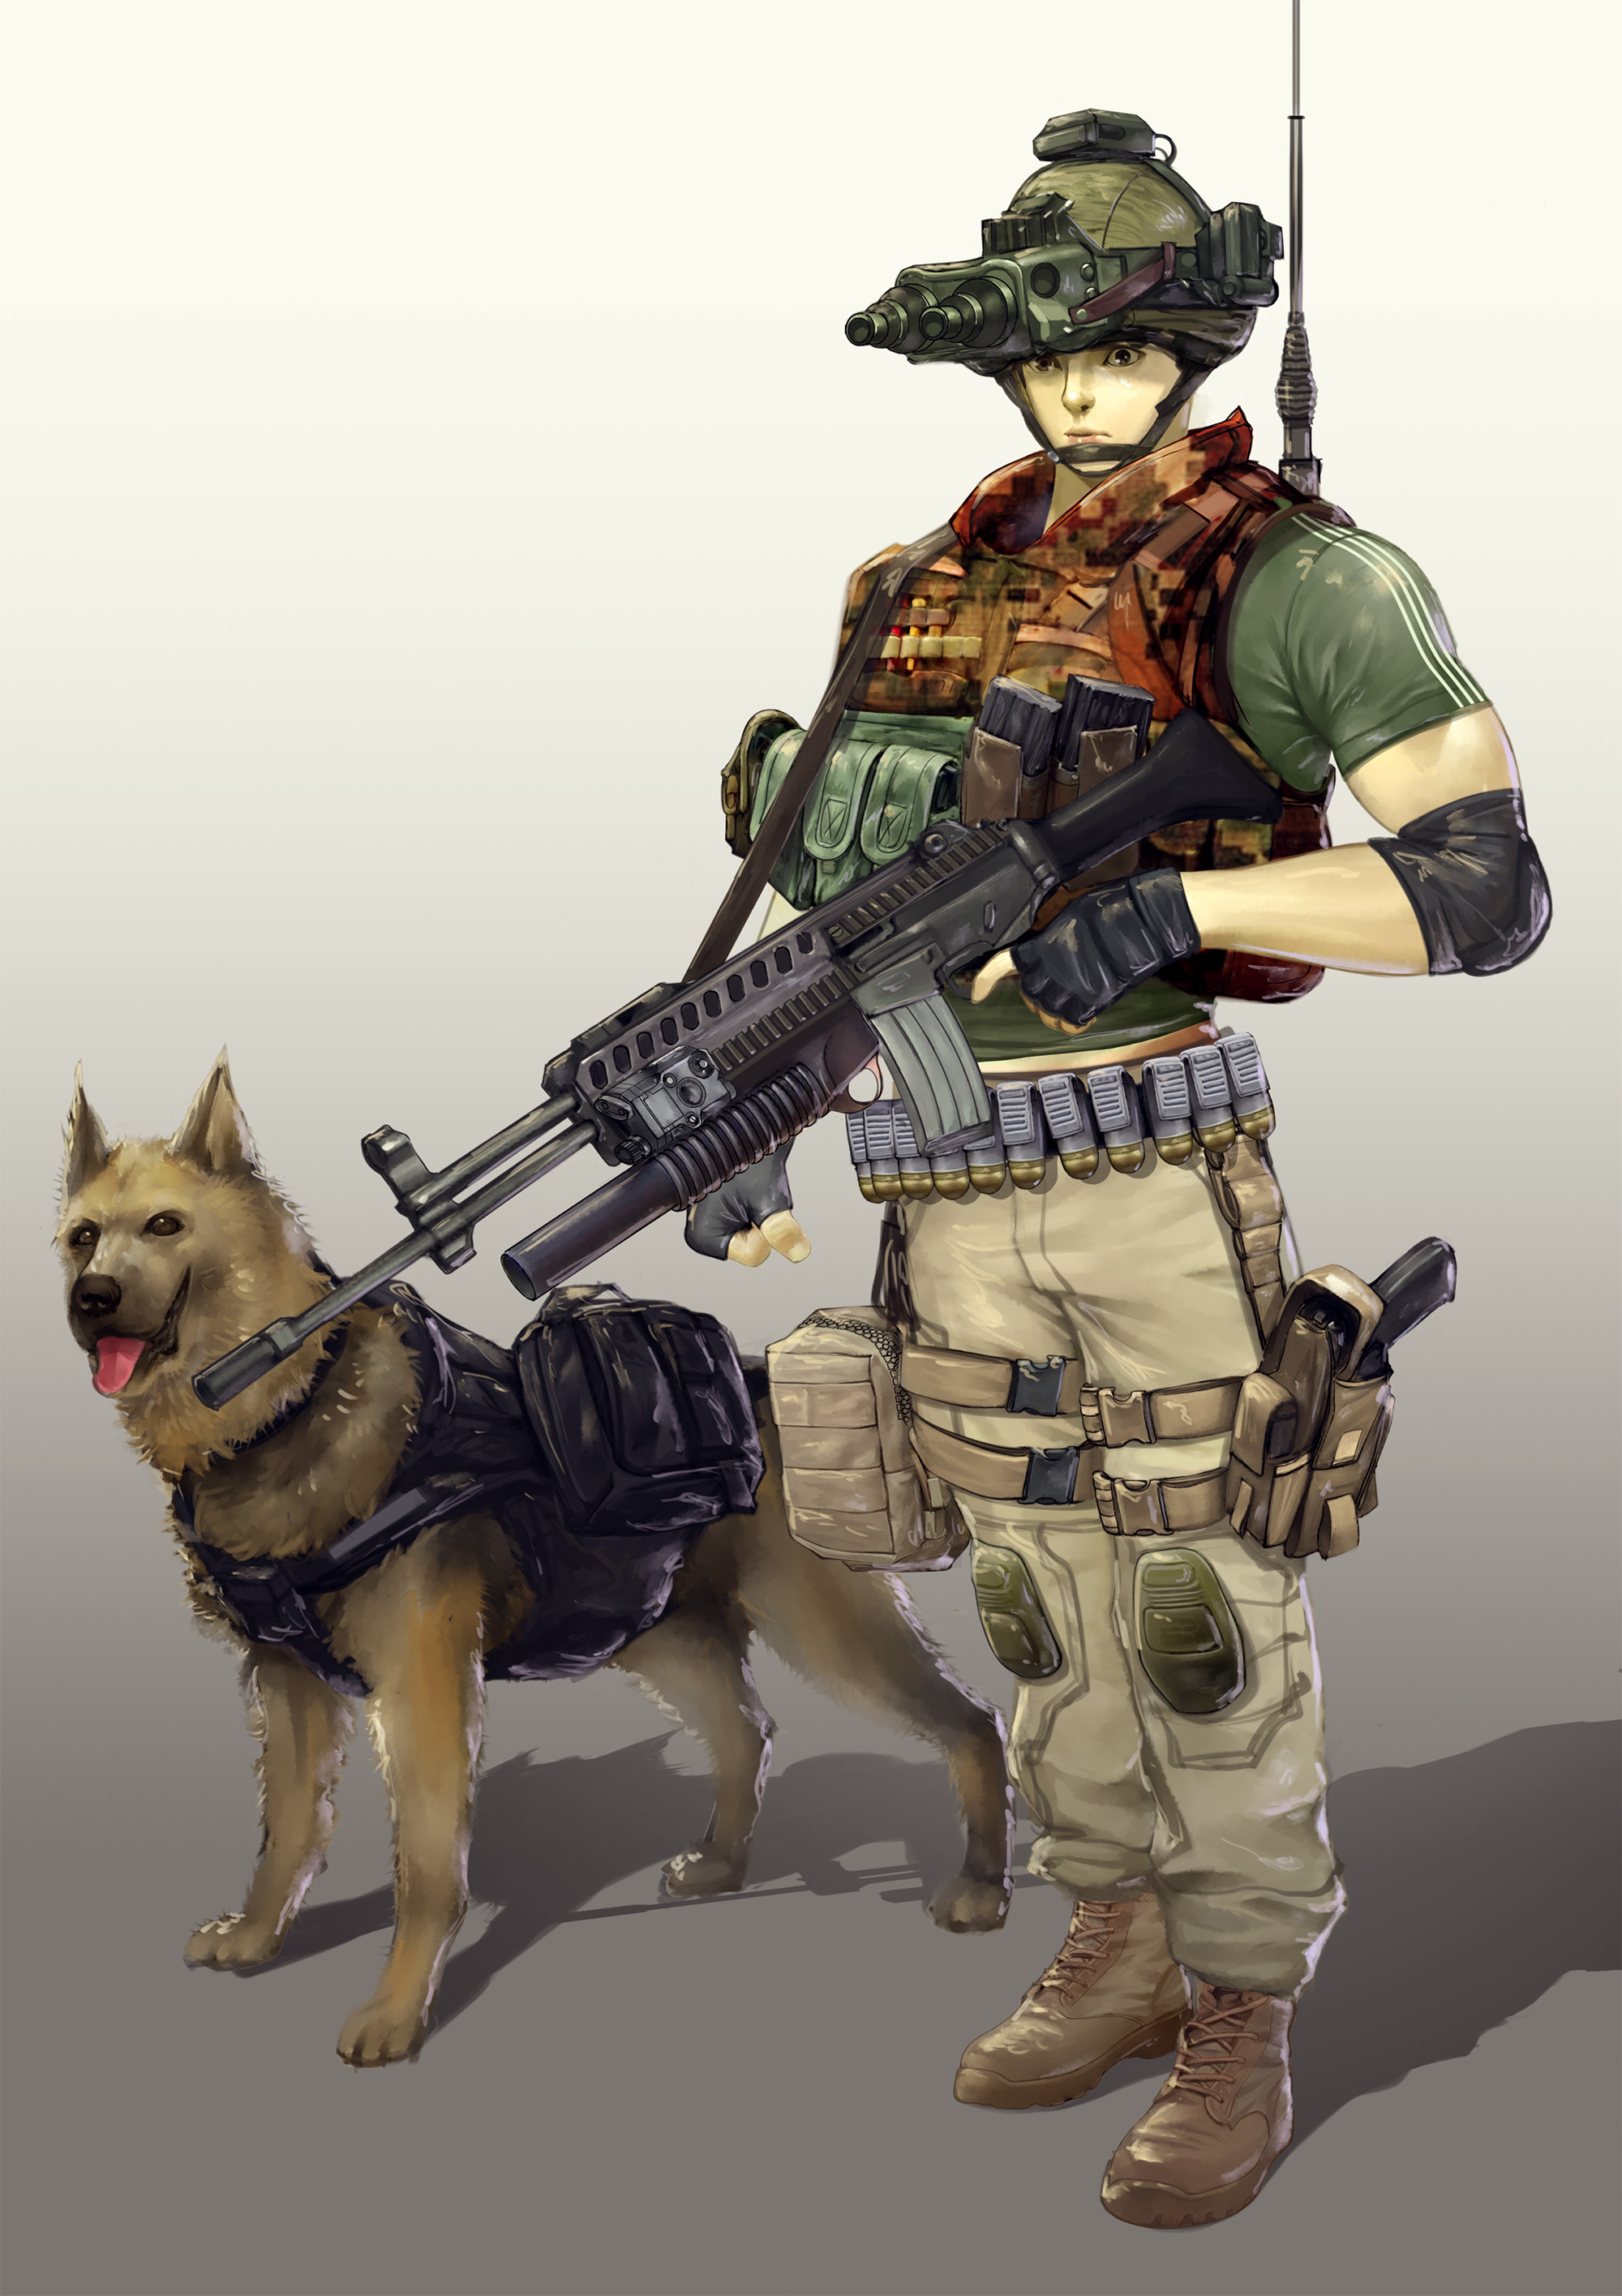 prompthunt: detailed drawing of pretty anime female mercenary with short  red hair and a assault rifle, tactical gear, PMC, Escape from tarkov,  feminine, character art, anime art, concept art, deviant art, trending